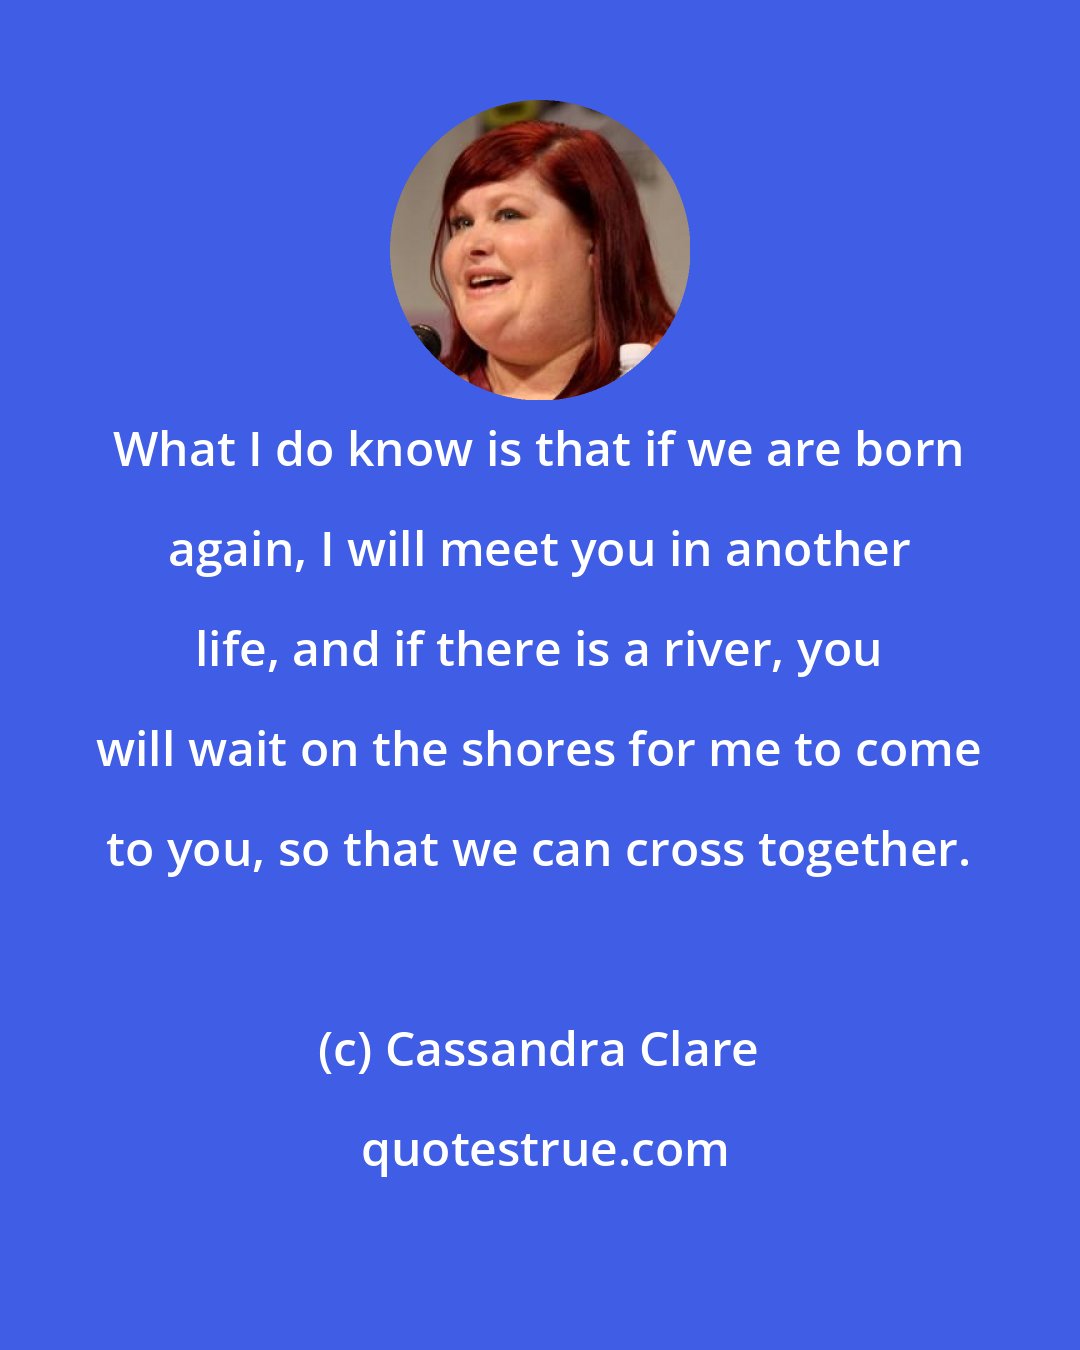 Cassandra Clare: What I do know is that if we are born again, I will meet you in another life, and if there is a river, you will wait on the shores for me to come to you, so that we can cross together.